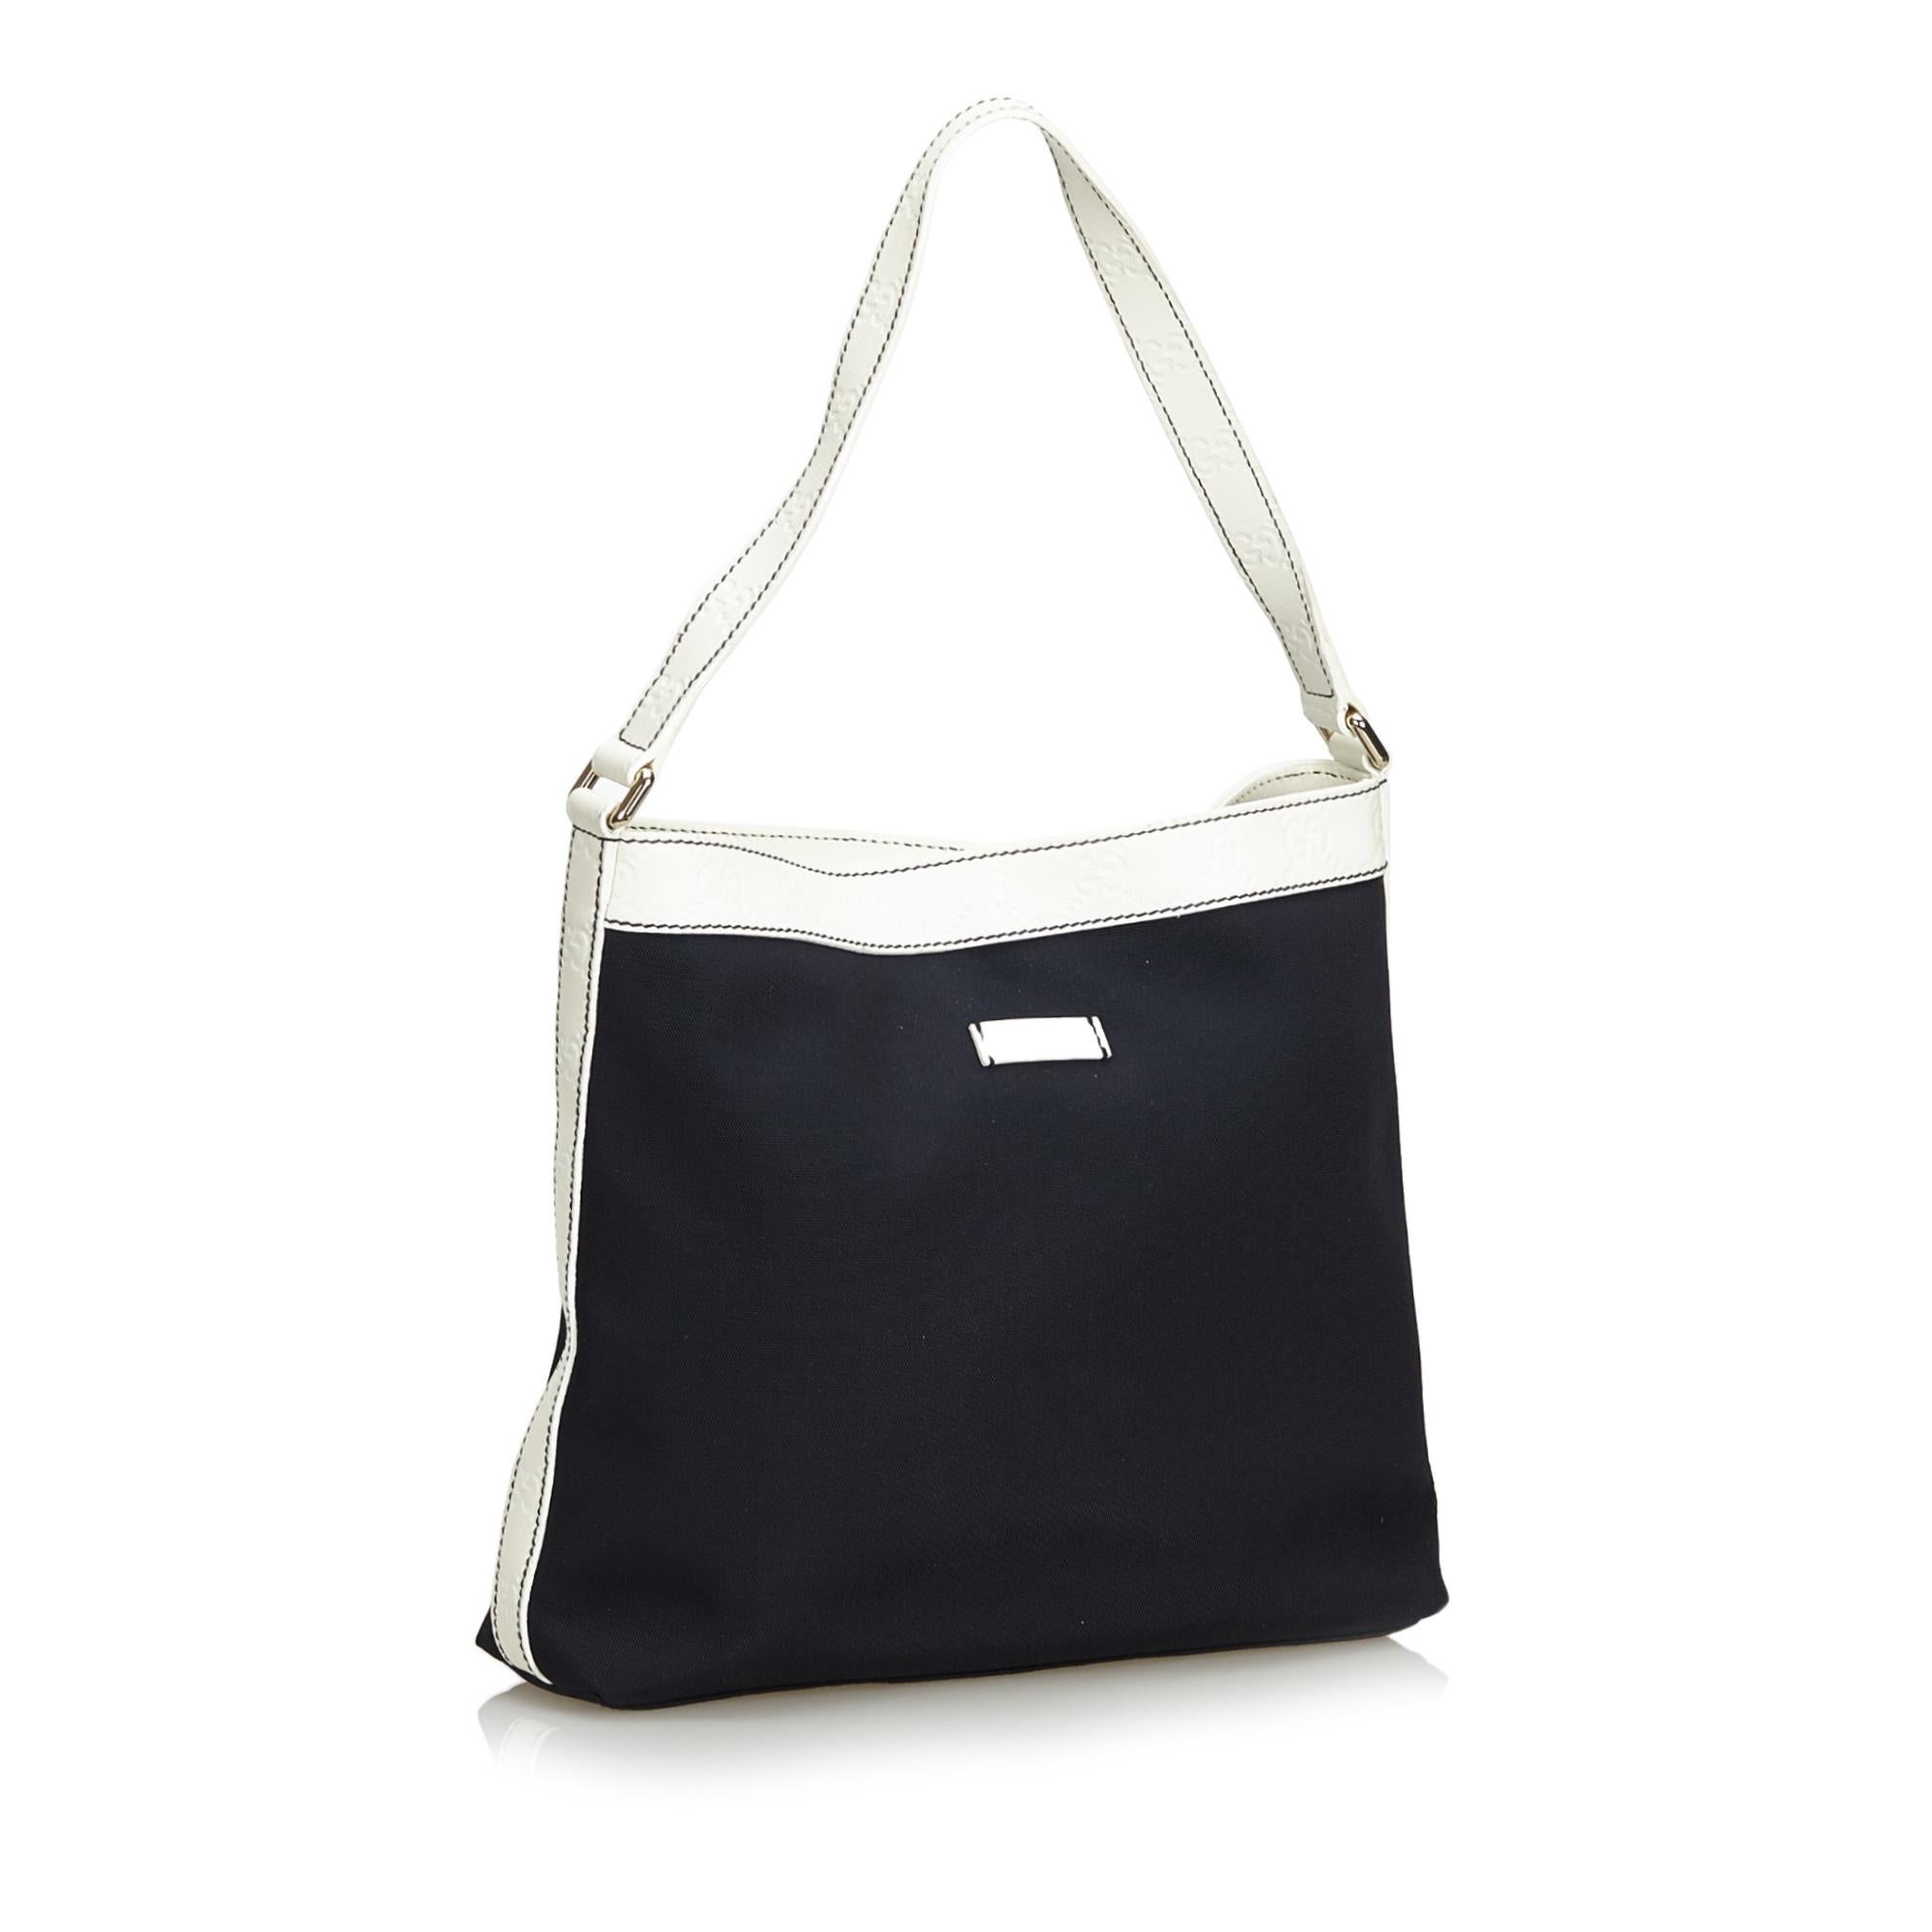 This shoulder bag features a nylon body with leather trim, flat leather strap, open top with magnetic closure and interior zip pocket. It carries as A condition rating.

Inclusions: 
Dust Bag

Dimensions:
Length: 25.50 cm
Width: 30.00 cm
Depth: 7.00